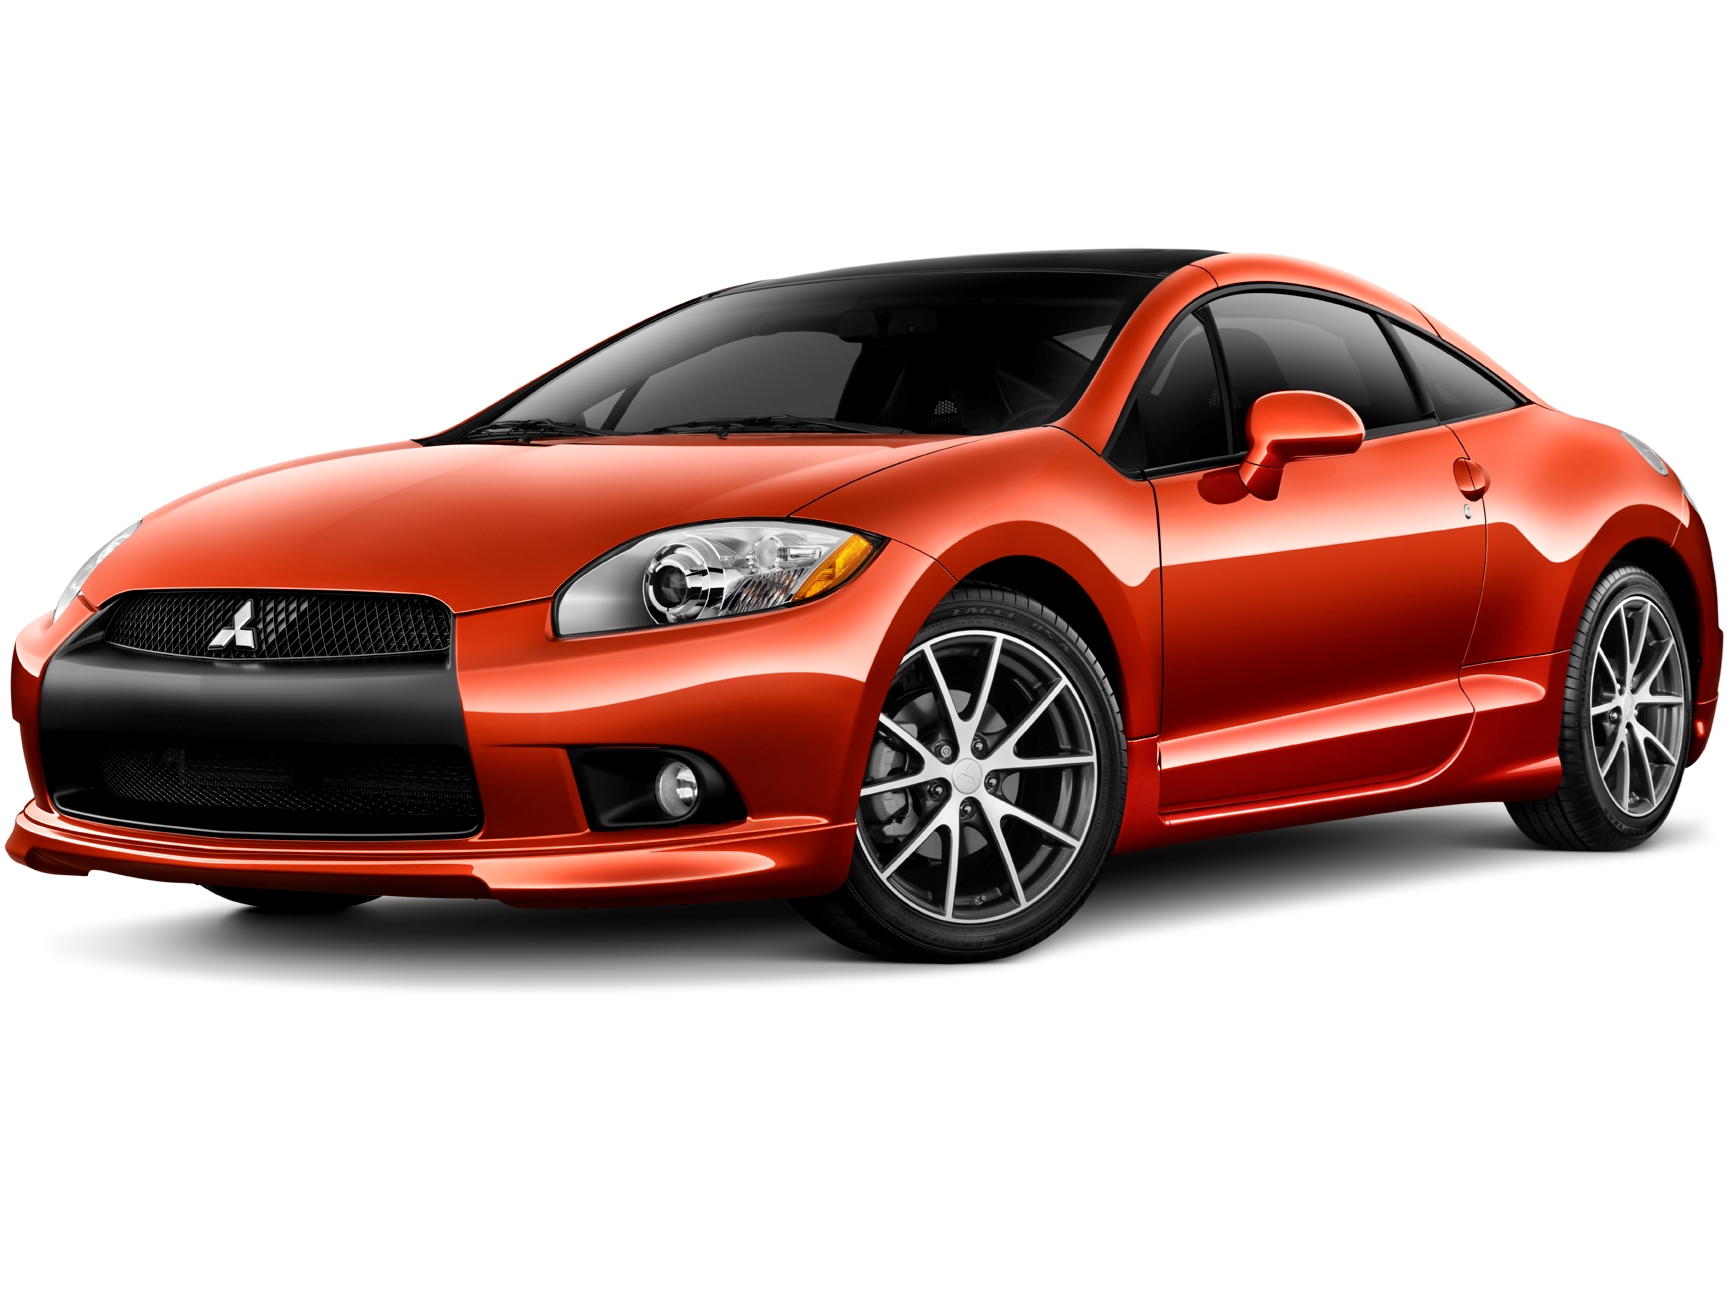 2010 Mitsubishi Eclipse GT Coupe Full Specs, Features and Price | CarBuzz